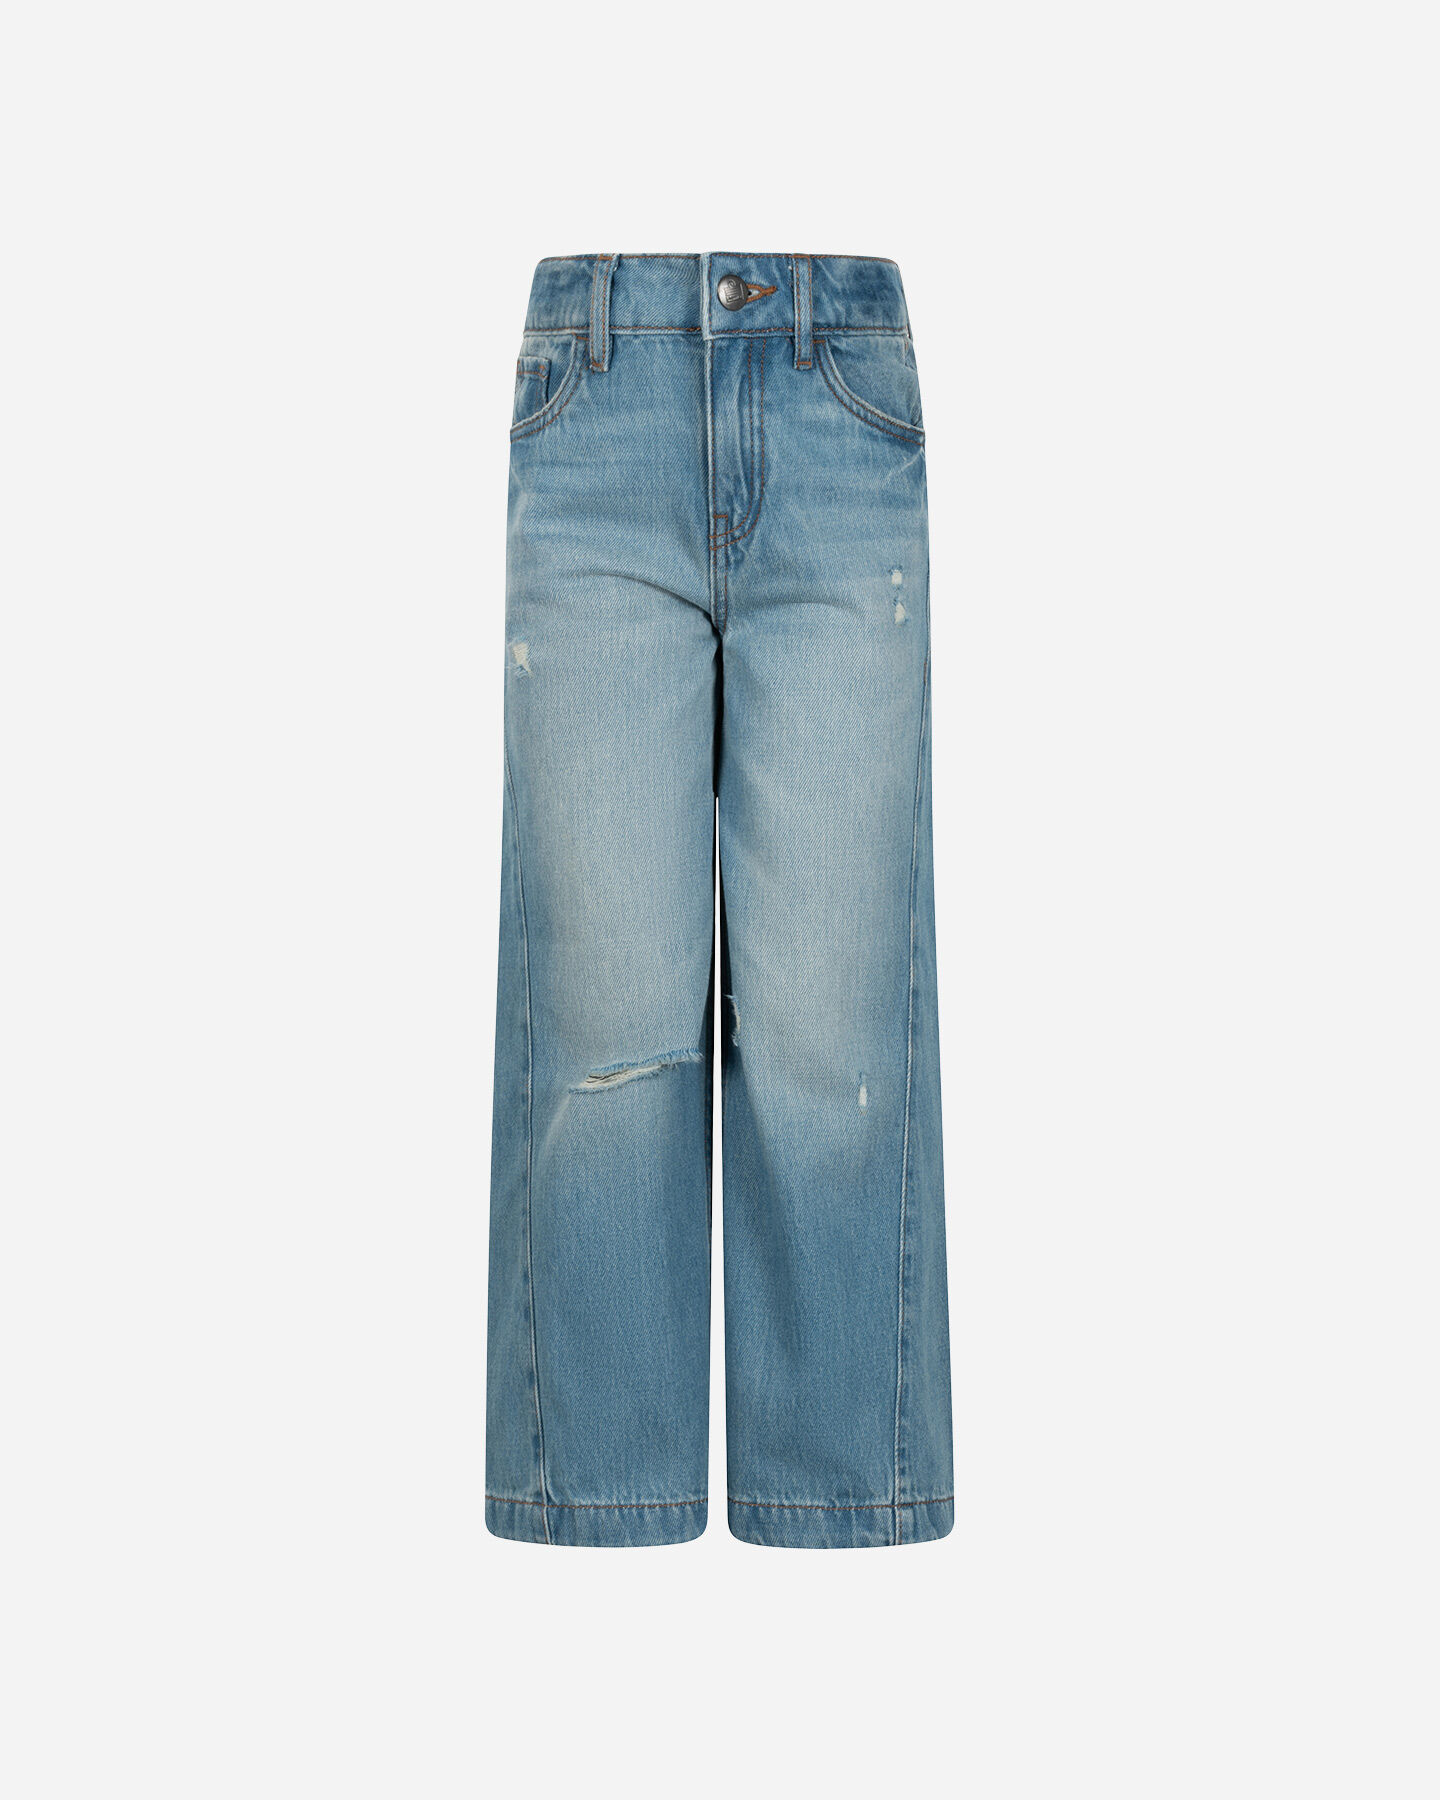  Jeans ADMIRAL LIFESTYLE JR S4130378|LD|6A scatto 0